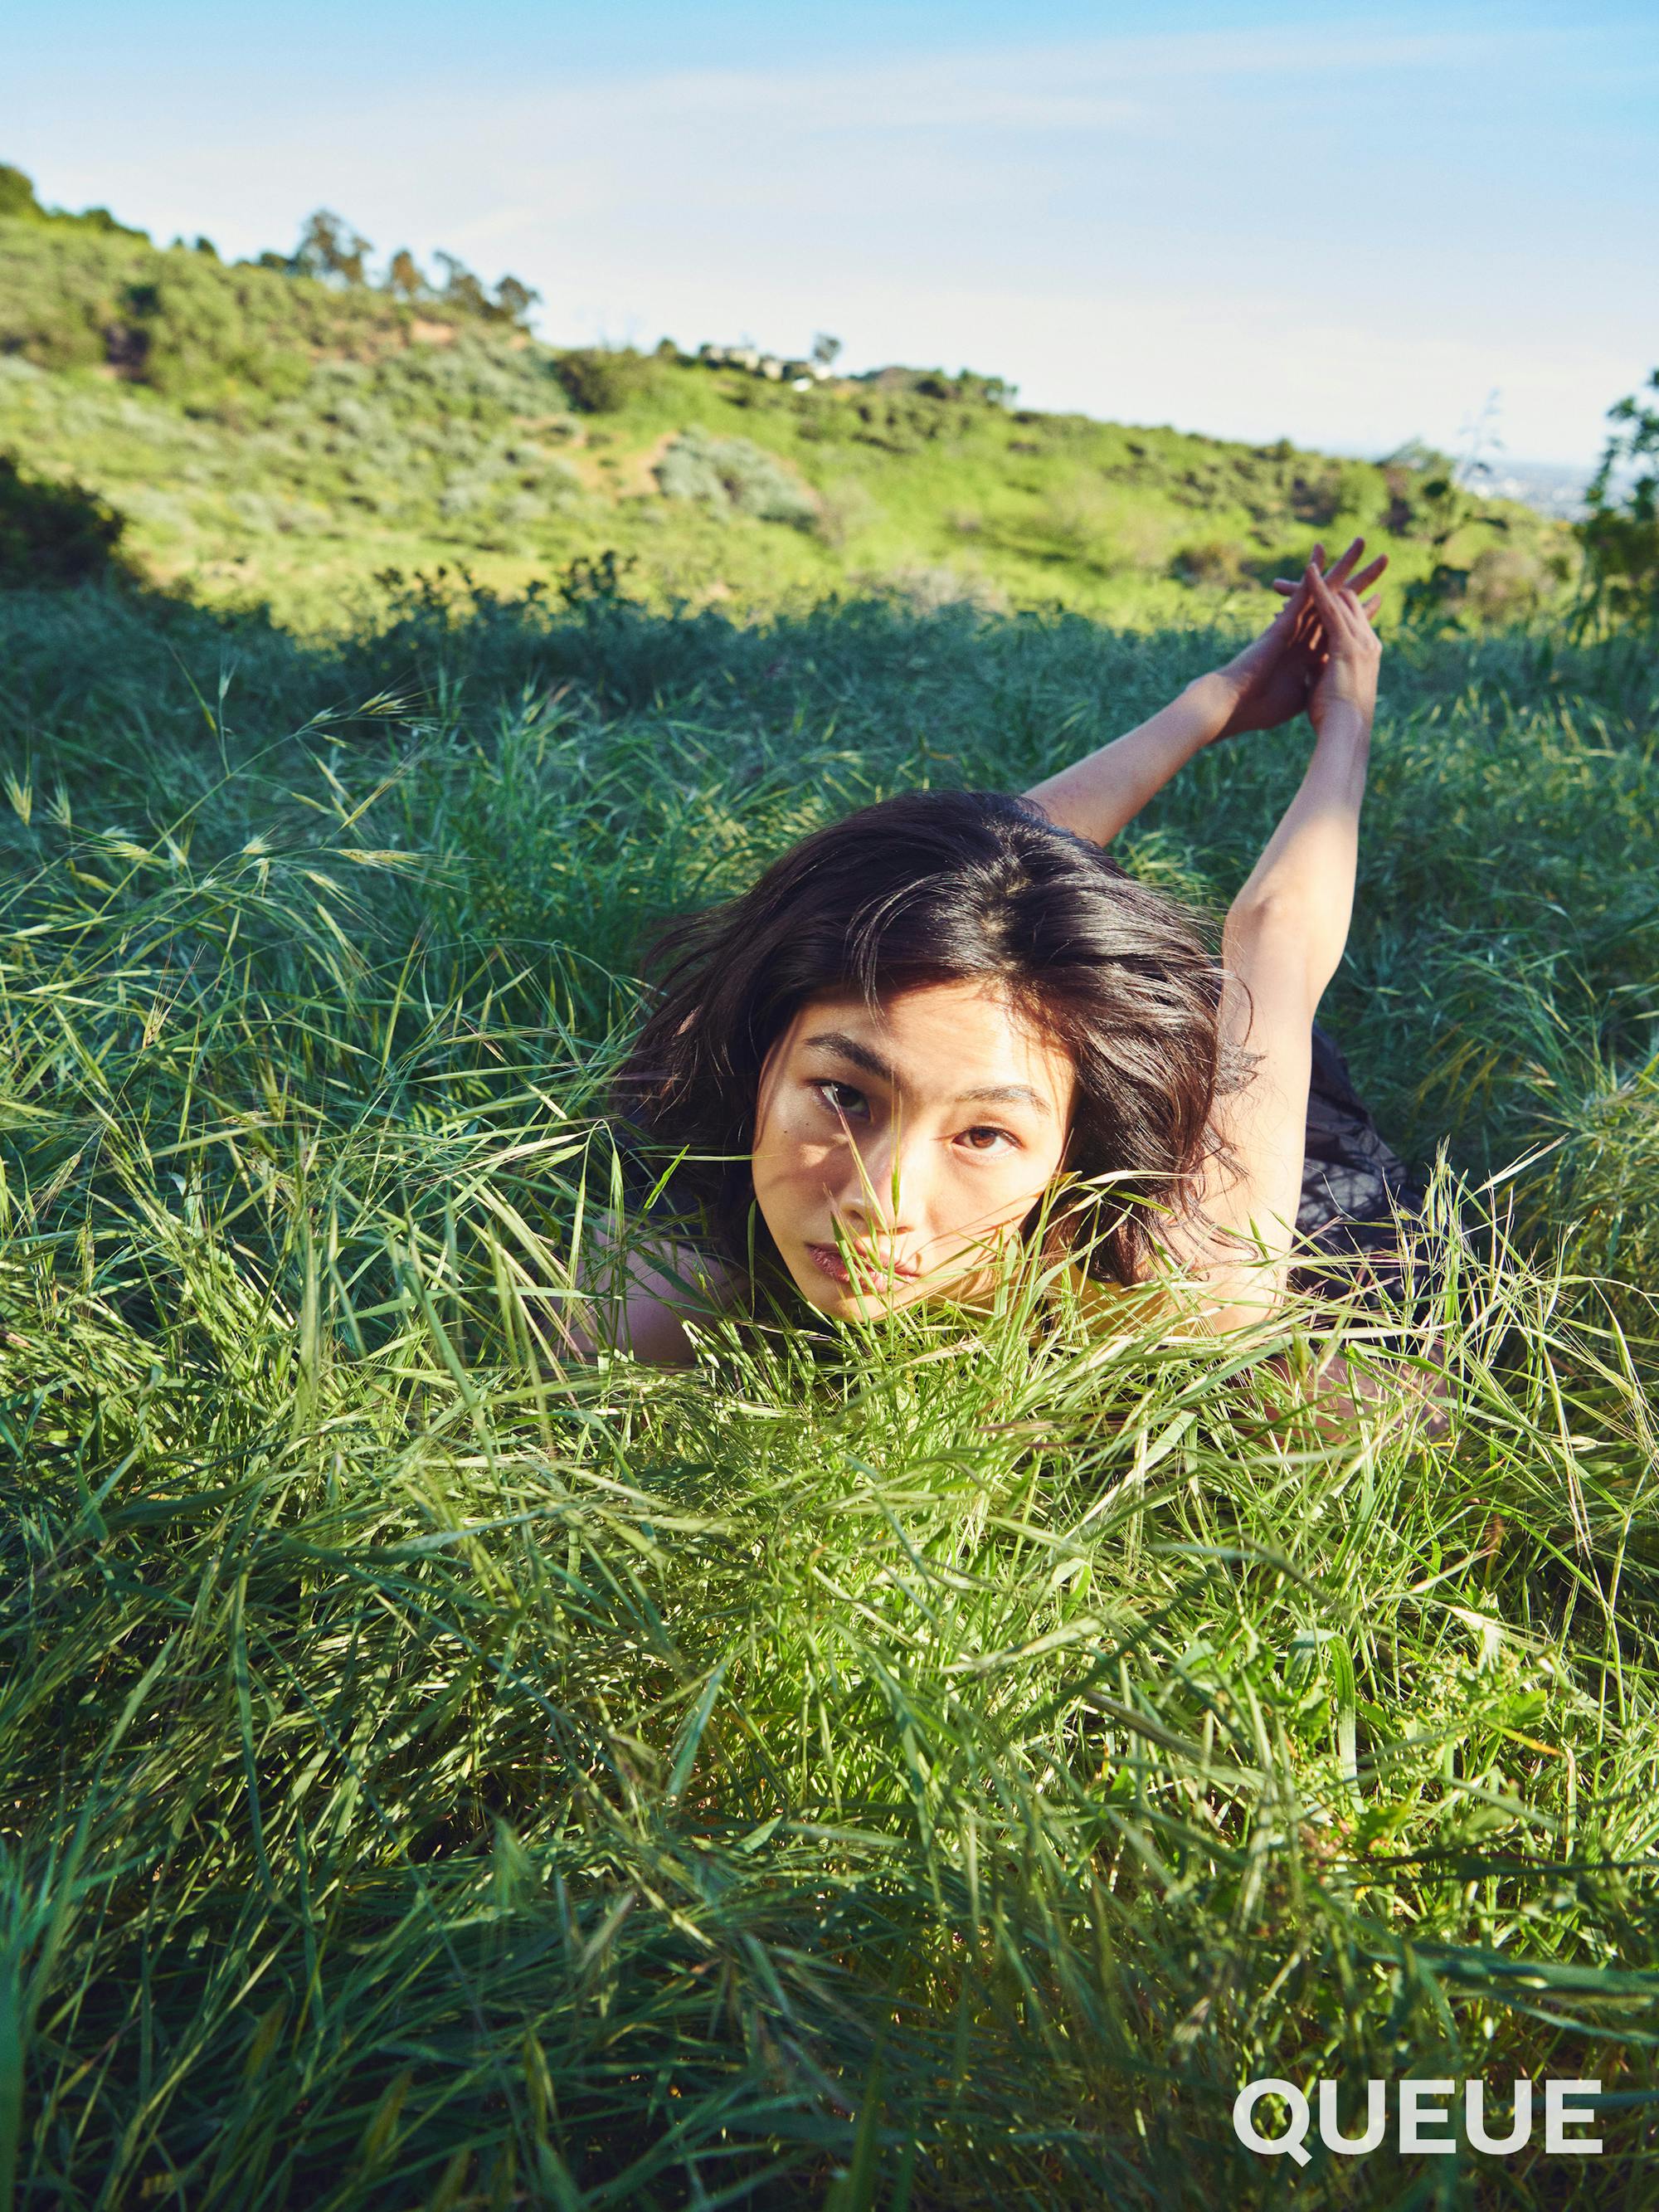 Jung Ho-yeon lies in the grass with her arms outstretched.